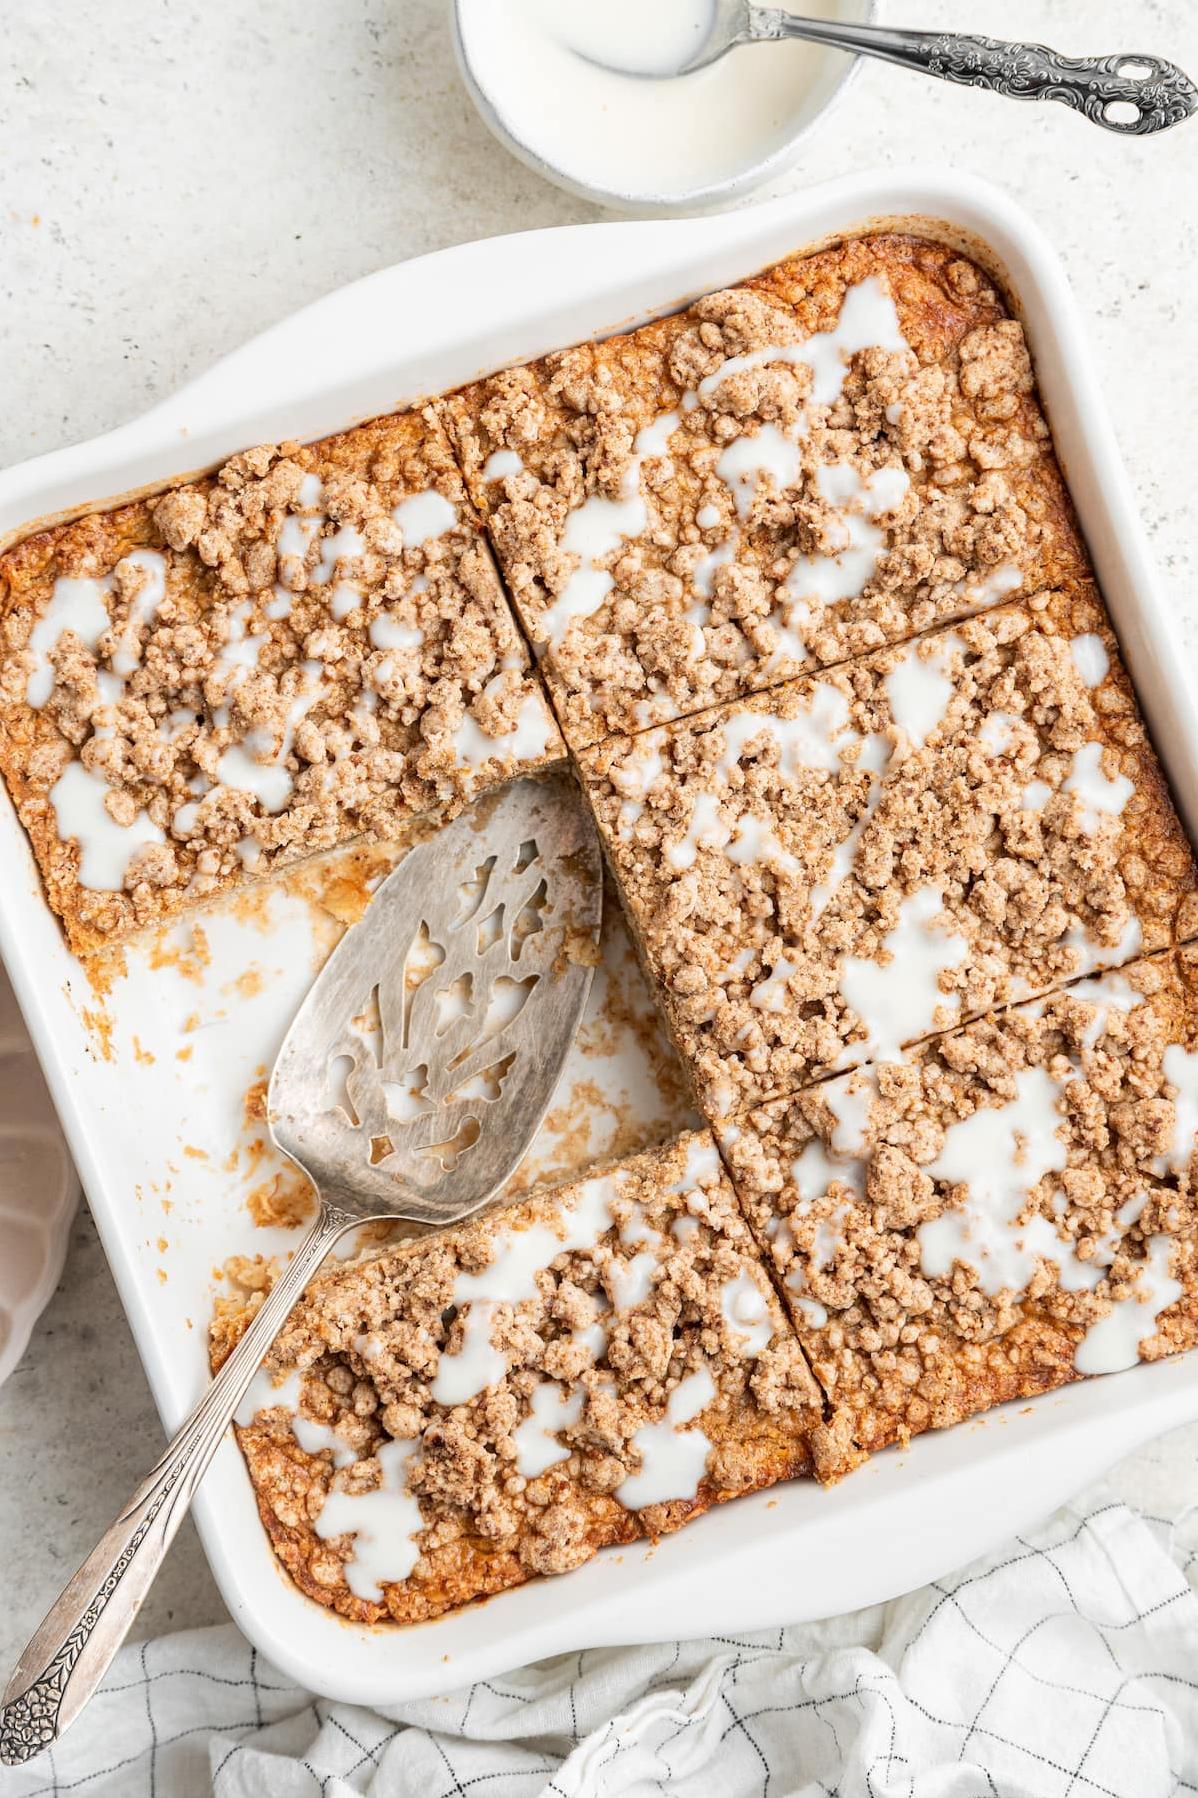 Almond Coffee Cake With Oatmeal-Crumb Topping